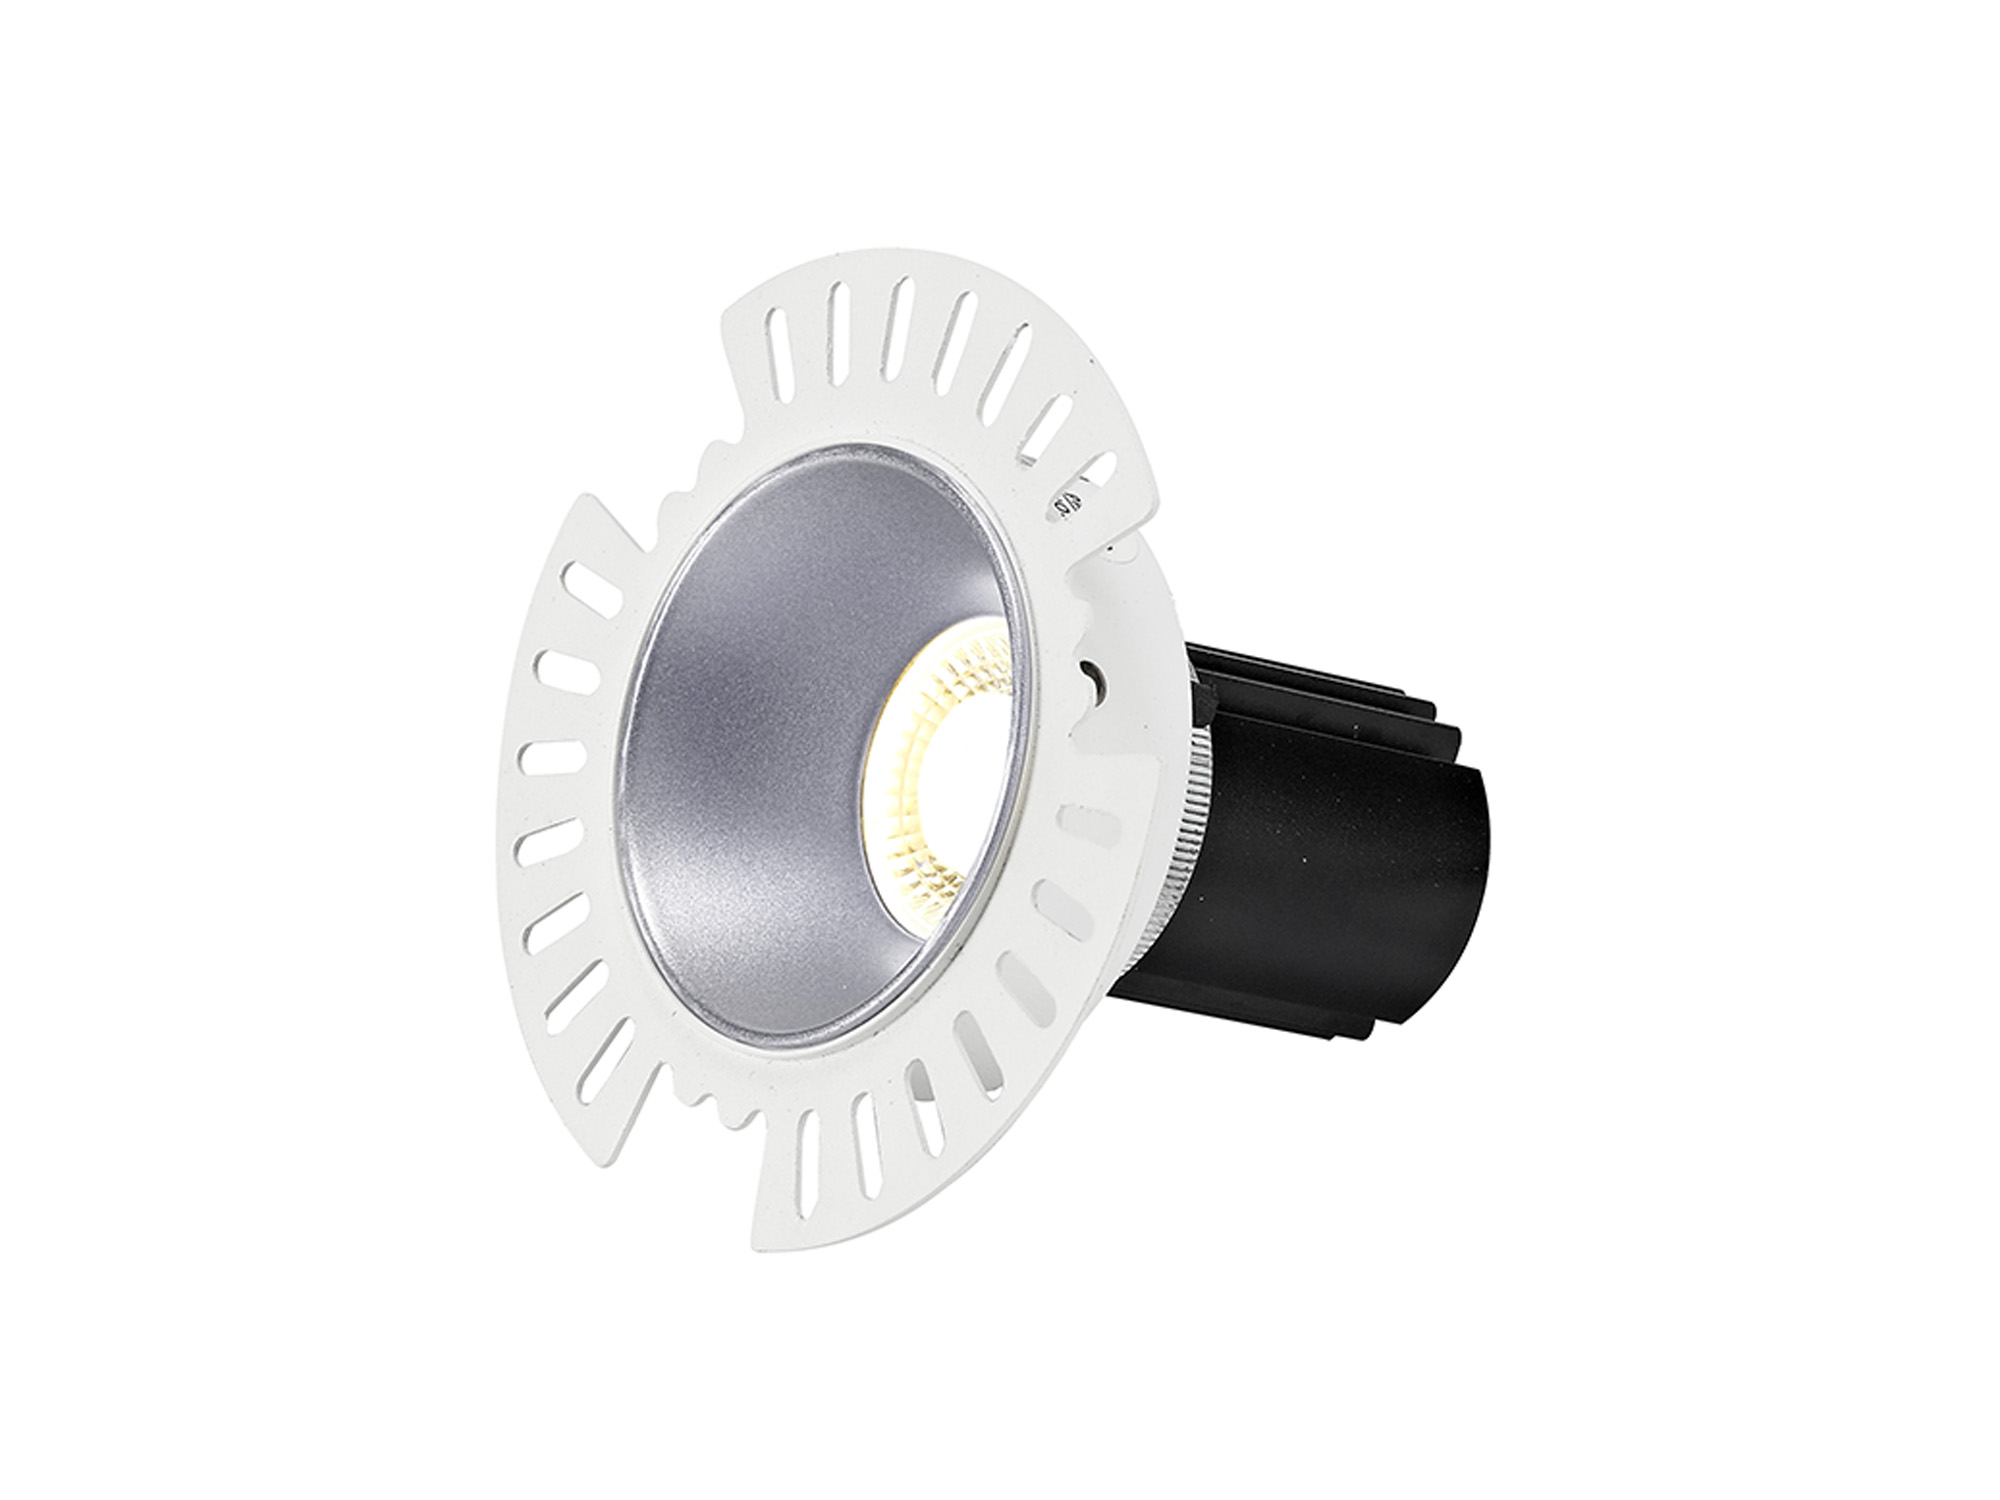 DM201820  Basy 12 Tridonic powered 12W 2700K 1200lm 12° CRI>90 LED Engine Silver Fixed Recessed Spotlight, IP20